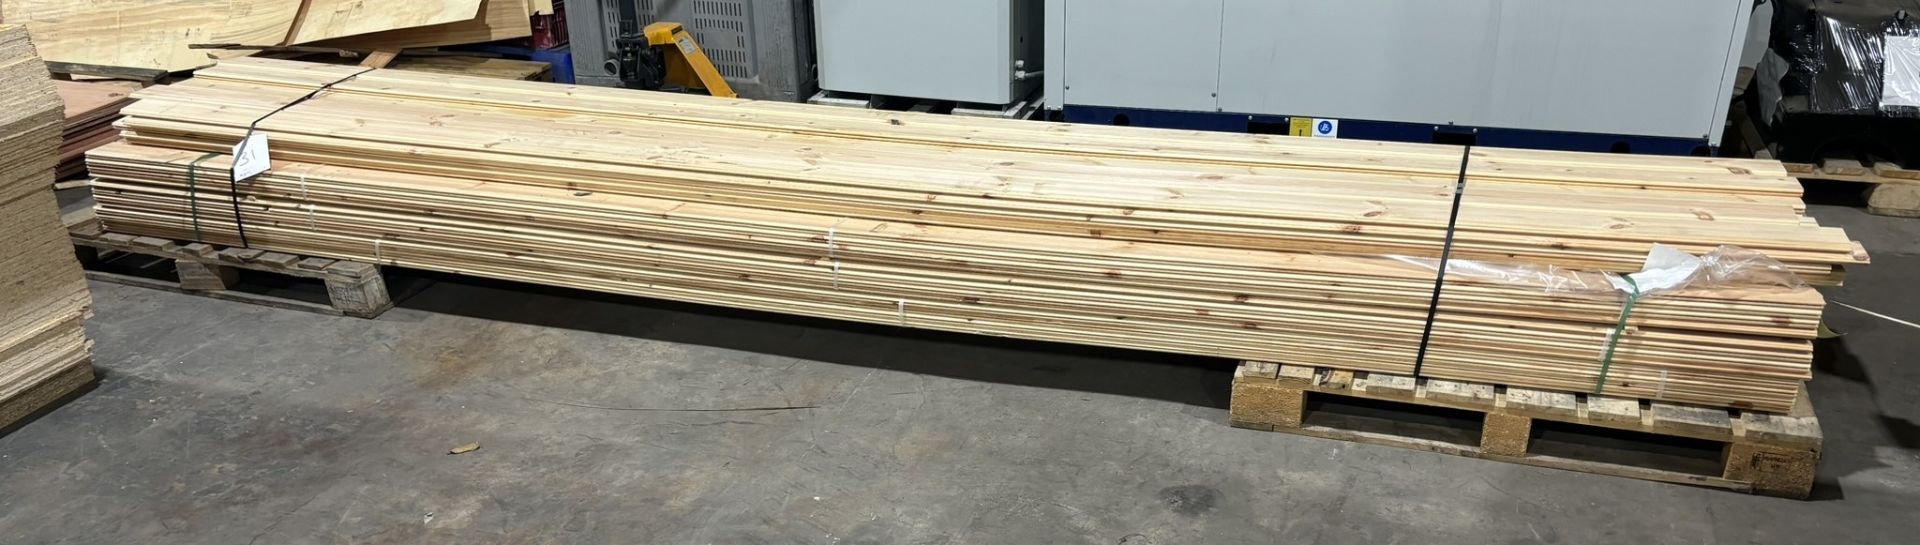 80 x Tounge And Groove Redwood | Size: 450cm x 11cm x 2cm - Image 2 of 6